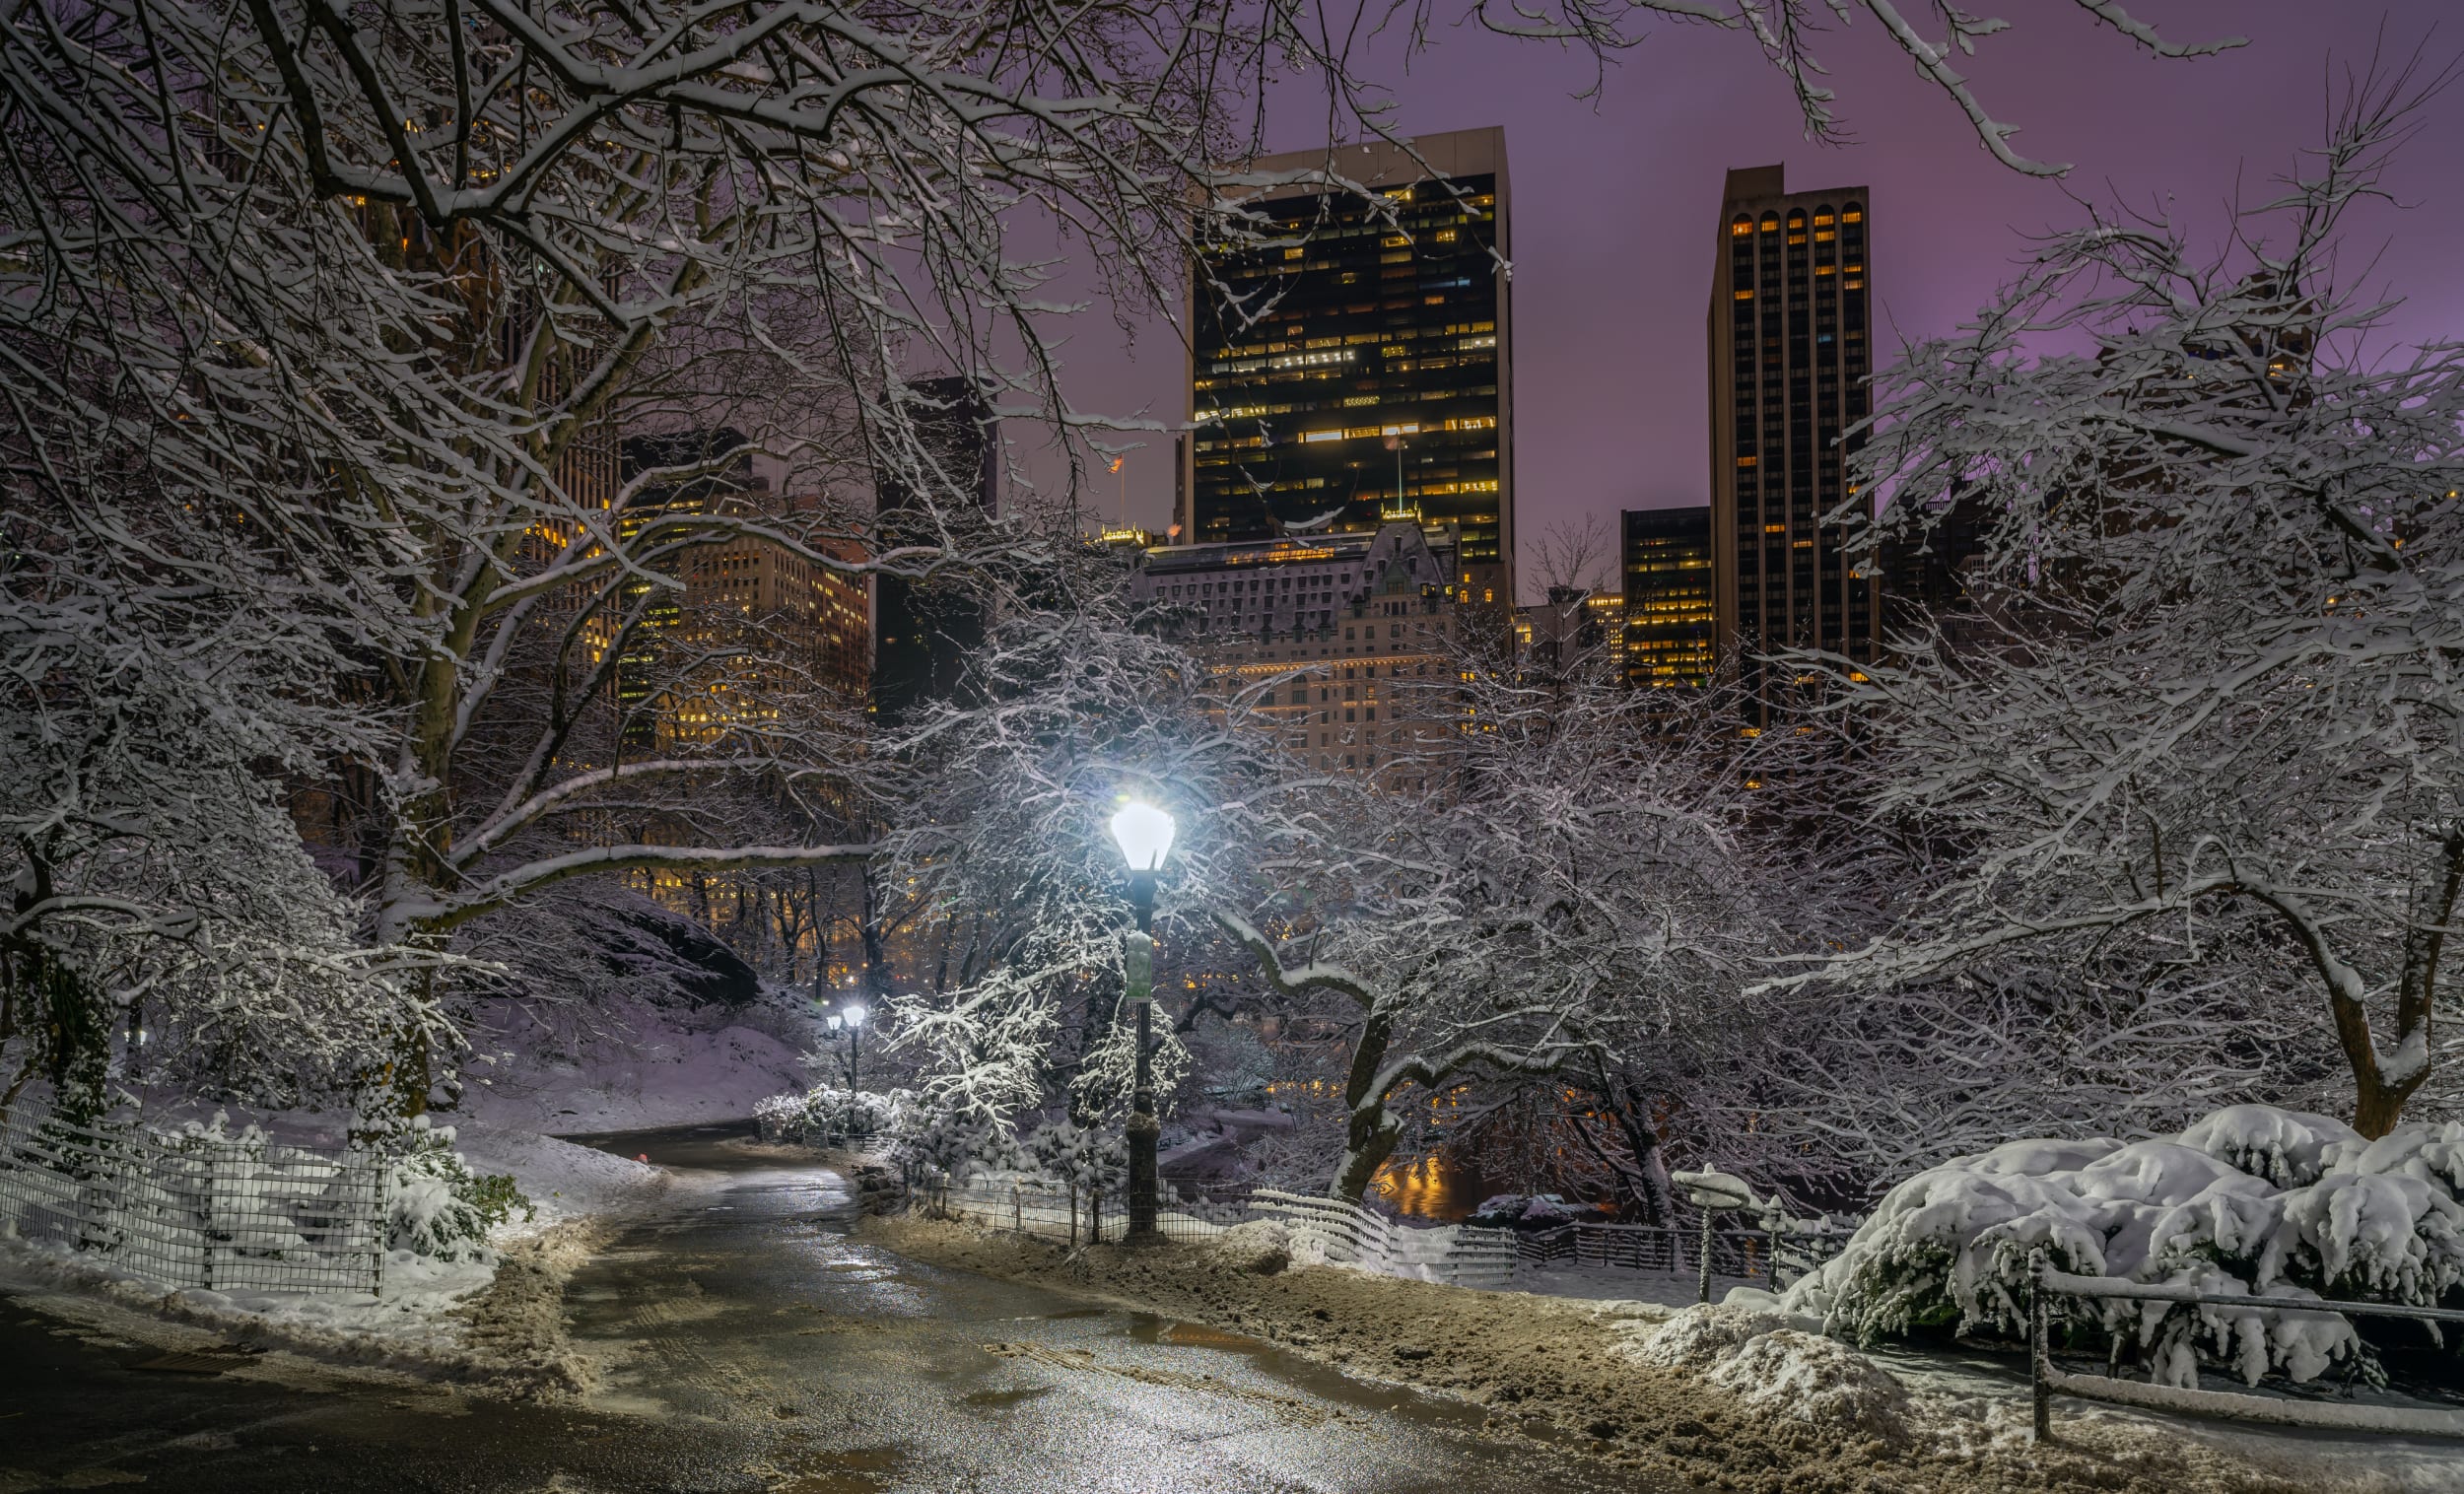 Central park in the snow, new york skyline in the background, snow covers trees and verges while a street lamp lights the pathway 